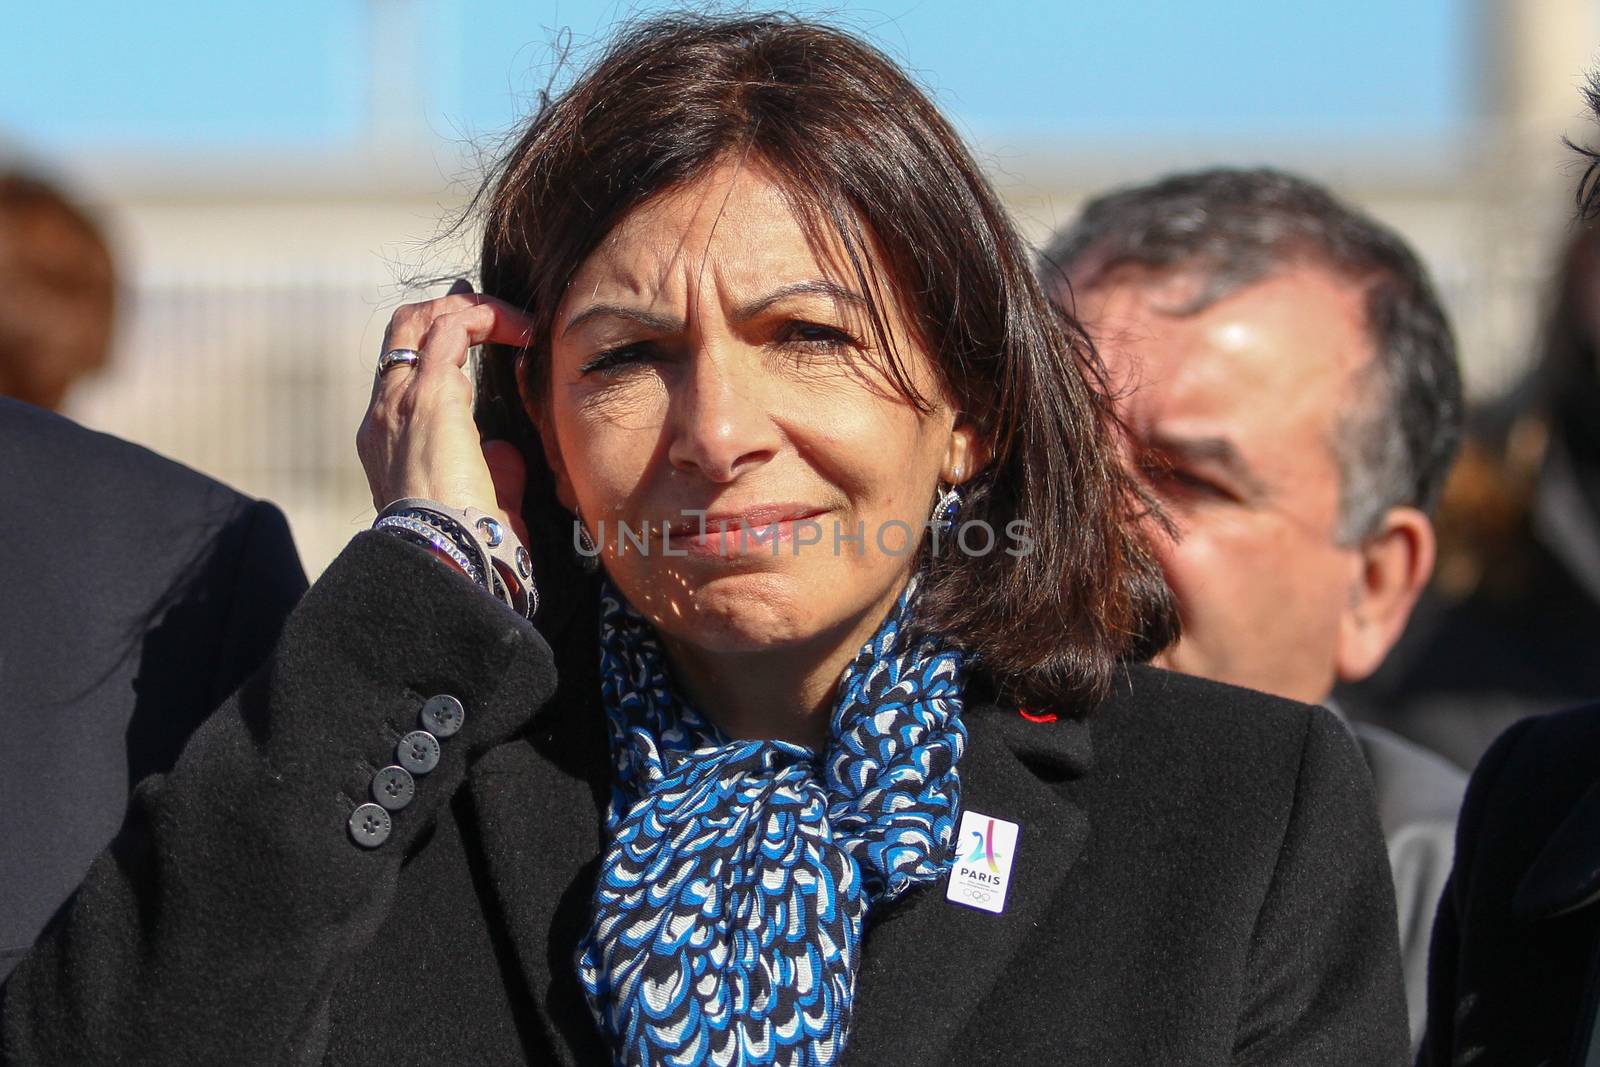 FRANCE, Marseille: Mayor of Paris Anne Hidalgo visits the future olympic sites in Marseille, on April 25, 2016 as part of Paris' candidature file to host the 2024 Olympic Games. 